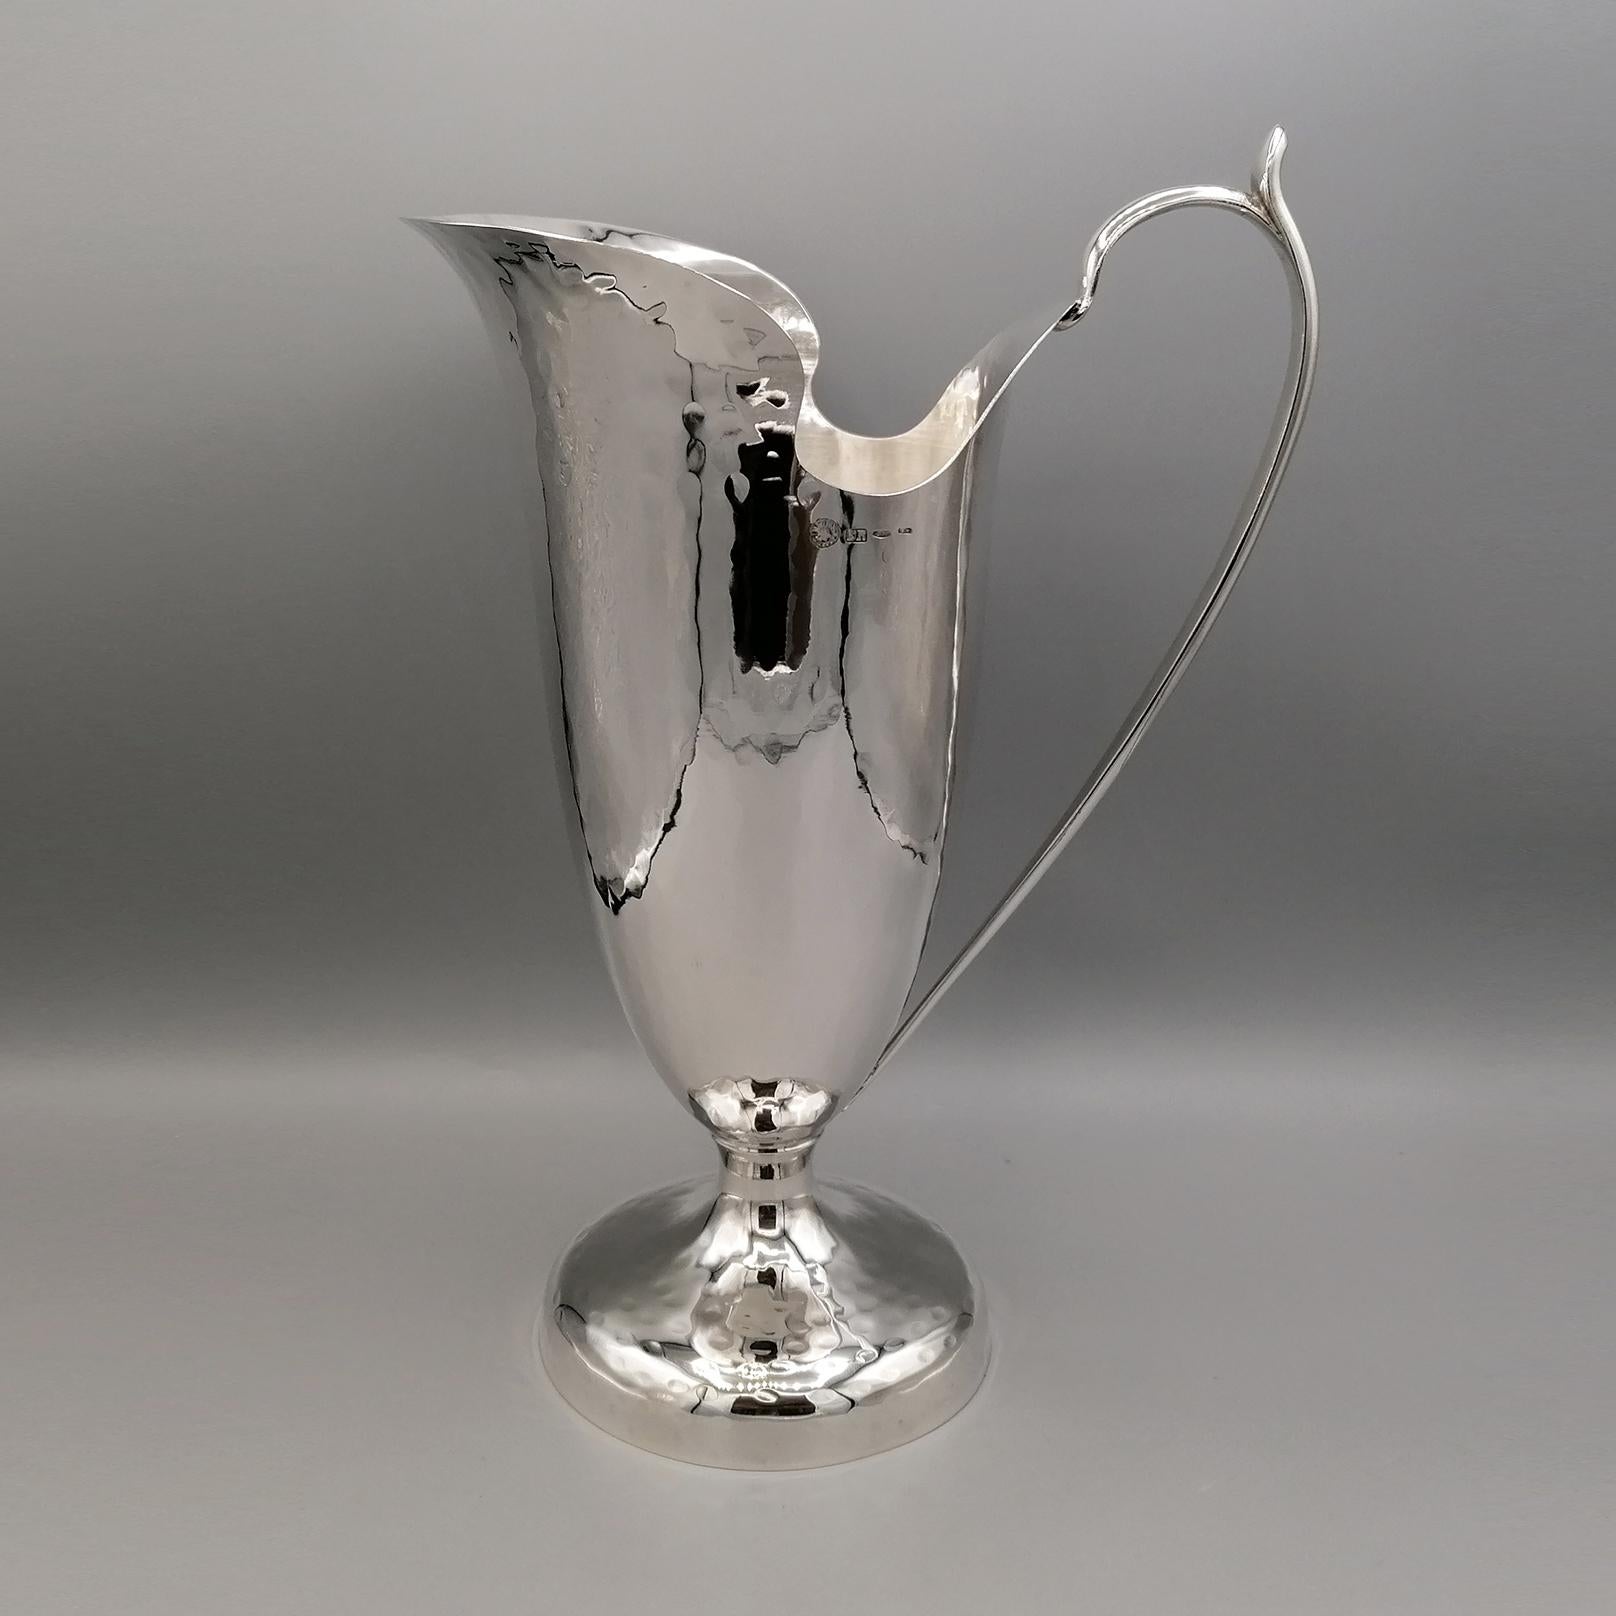 Pitcher in 800 silver handmade in Italy.
The jug was made from a silver plate, shaped and welded.
The imposing base of the jug, round in shape, is hammered and proportioned to give perfect stability to the whole object.
The body branches out from